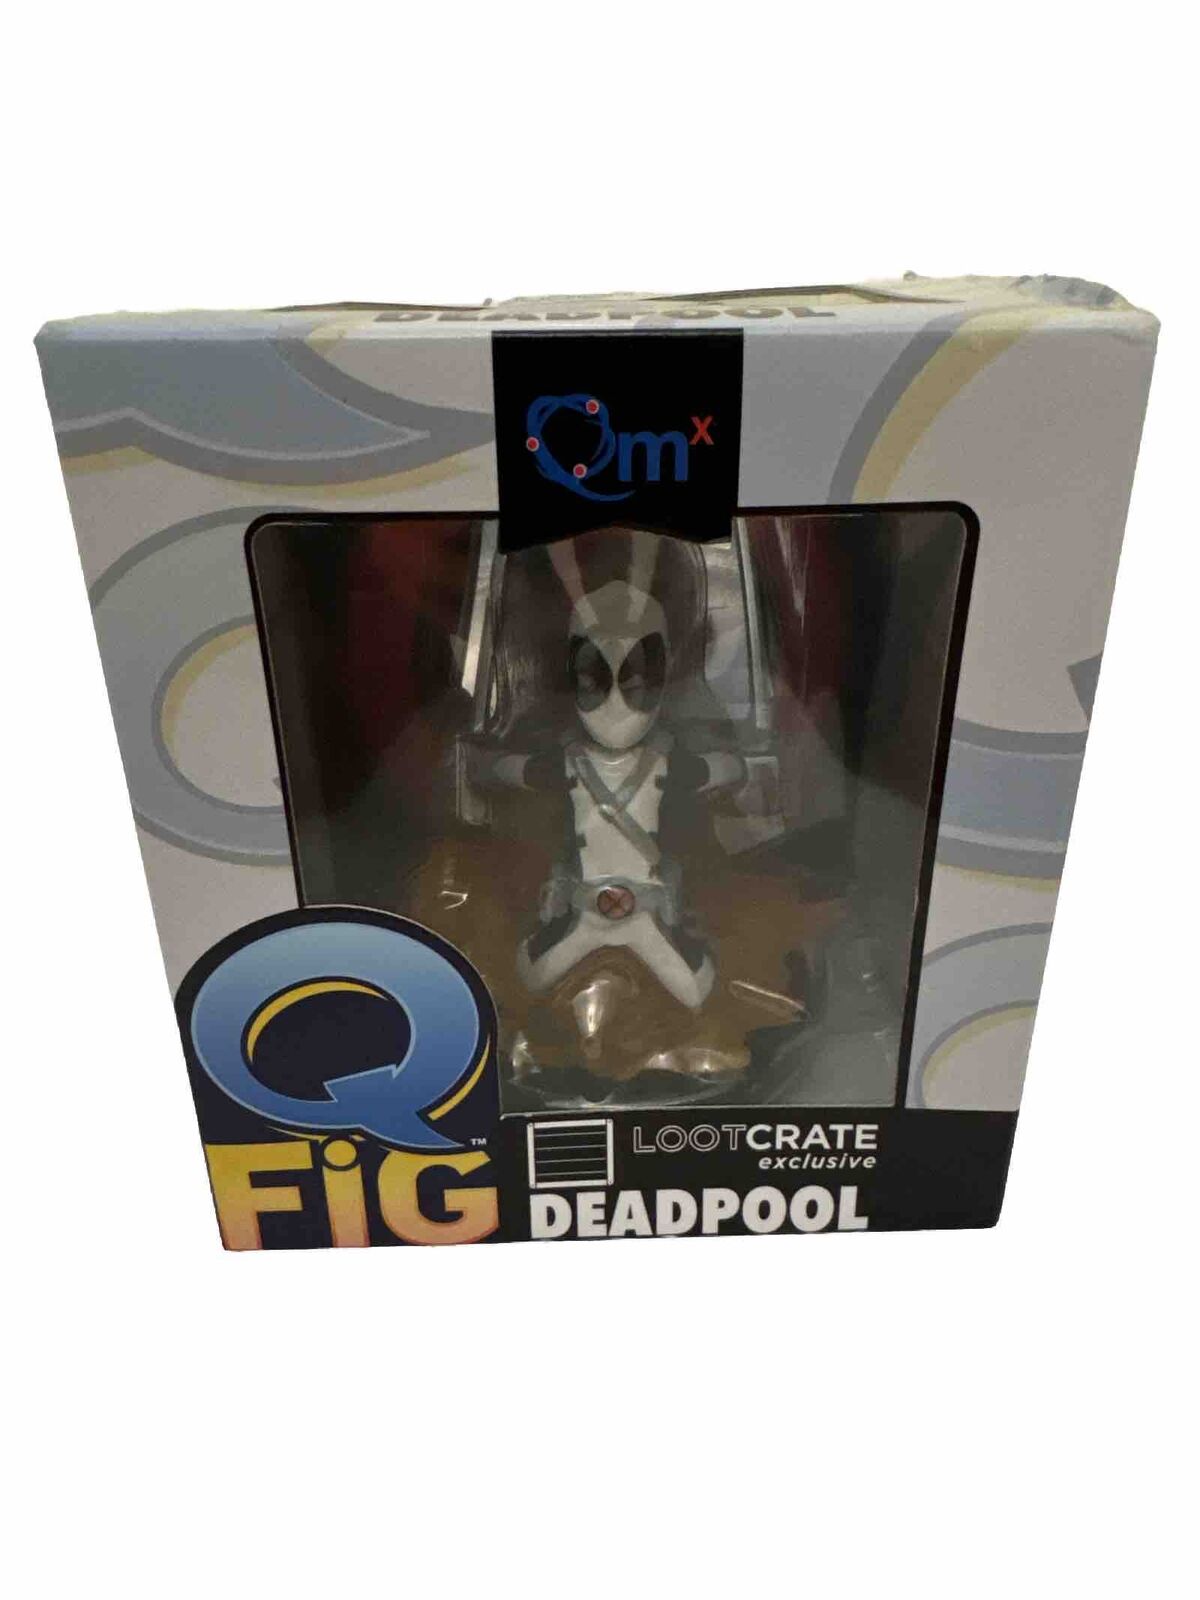 QmX Q-Fig Marvel Deadpool (X-Force) Loot Crate Exclusive Collectible Figure